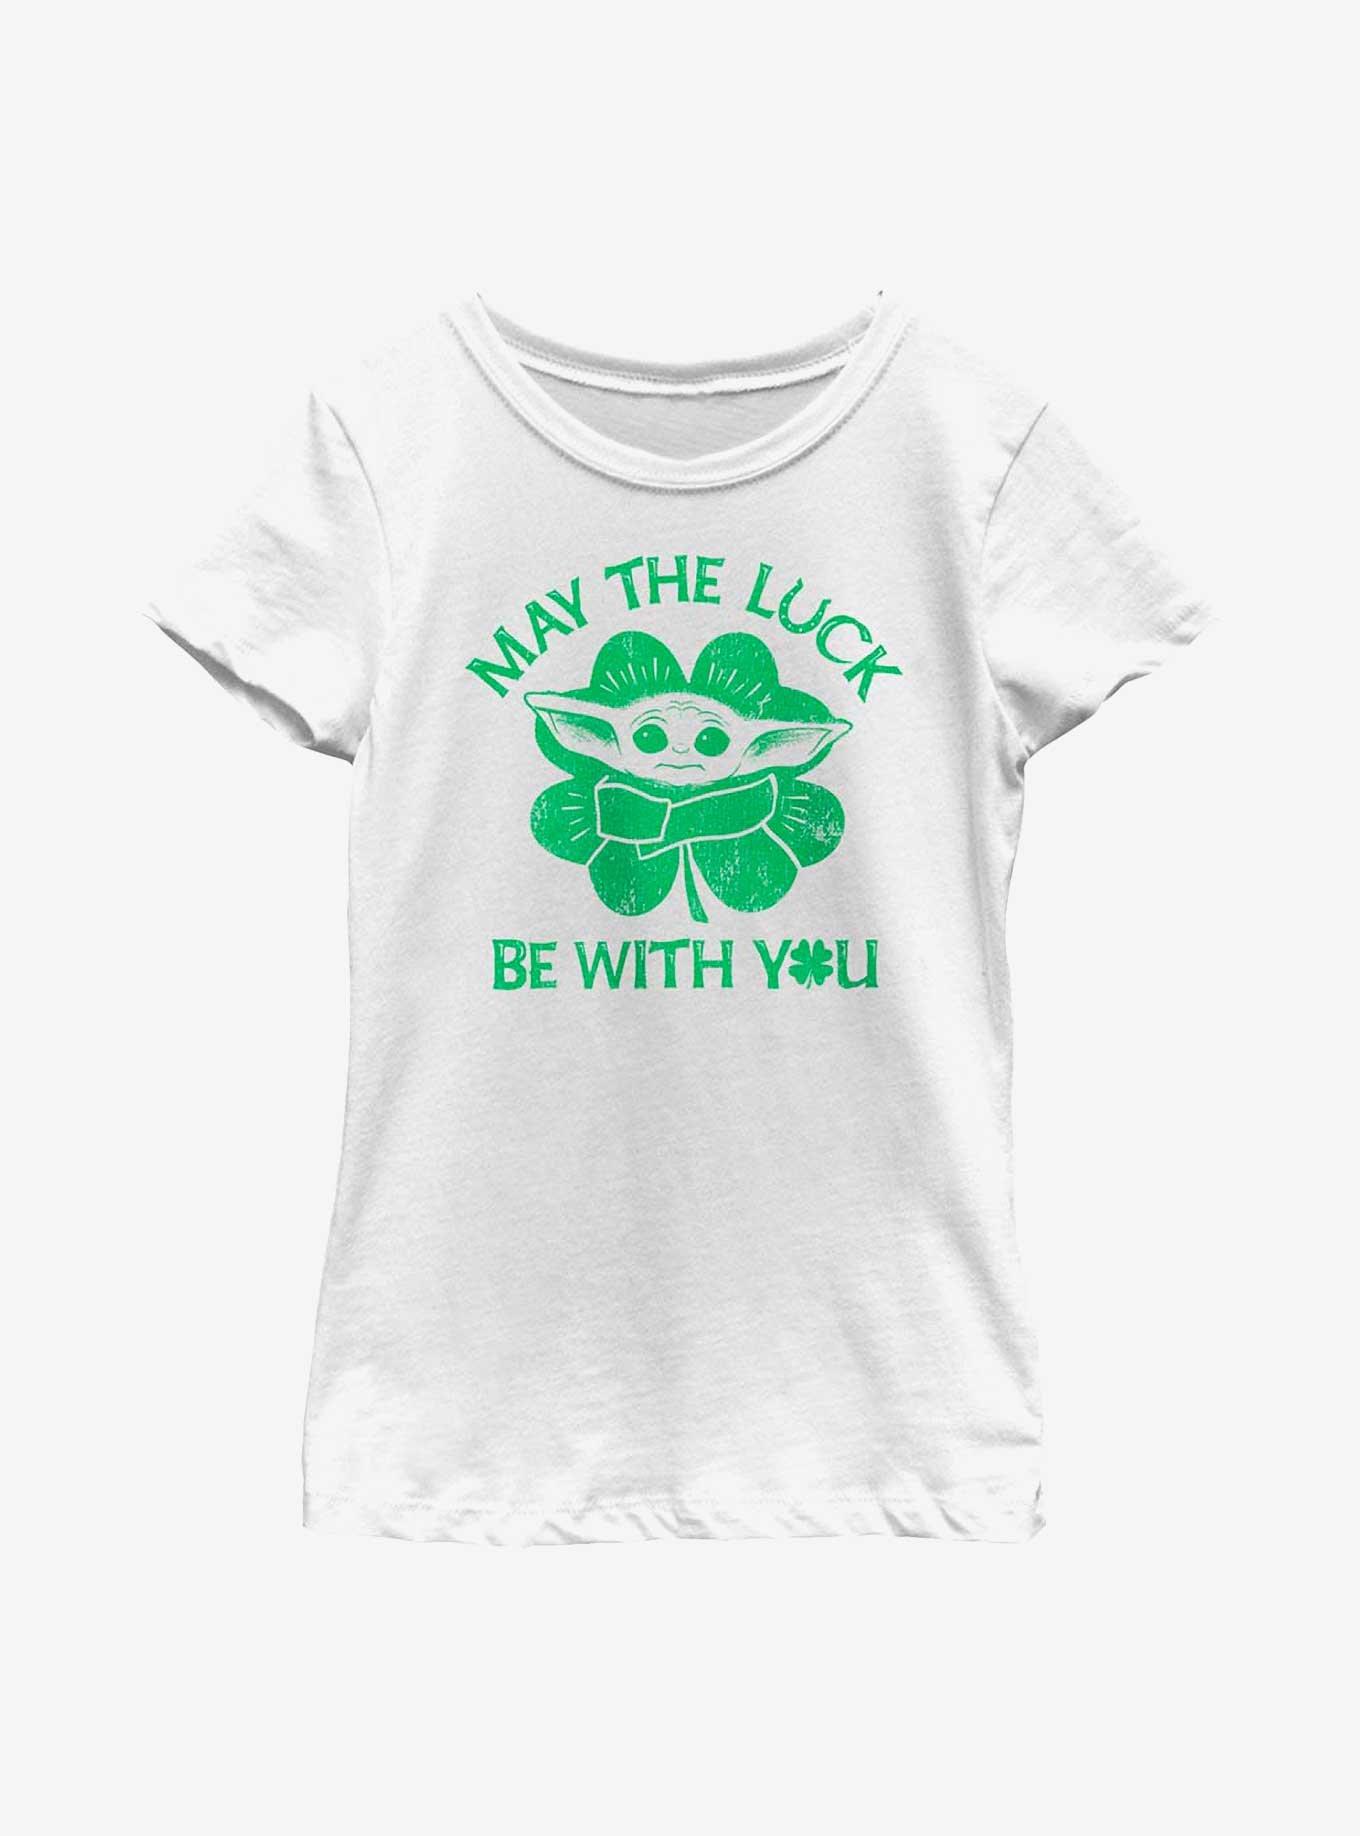 Star Wars The Mandalorian Strong Luck Youth Girls T-Shirt, WHITE, hi-res